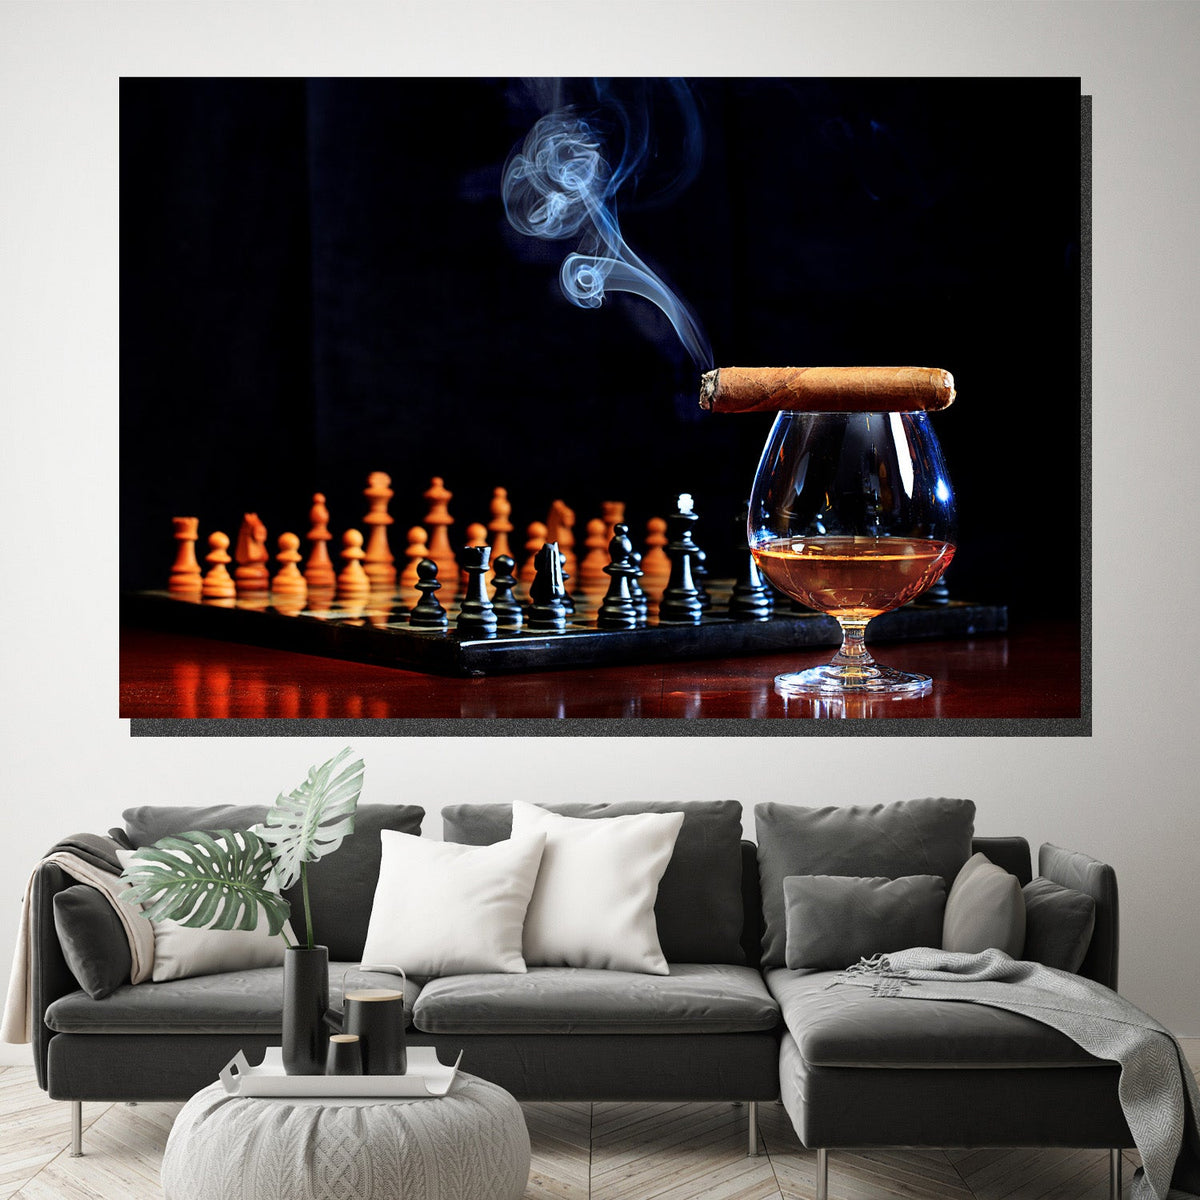 https://cdn.shopify.com/s/files/1/0387/9986/8044/products/ChessScotchandCigarCanvasArtprintStretched-1.jpg